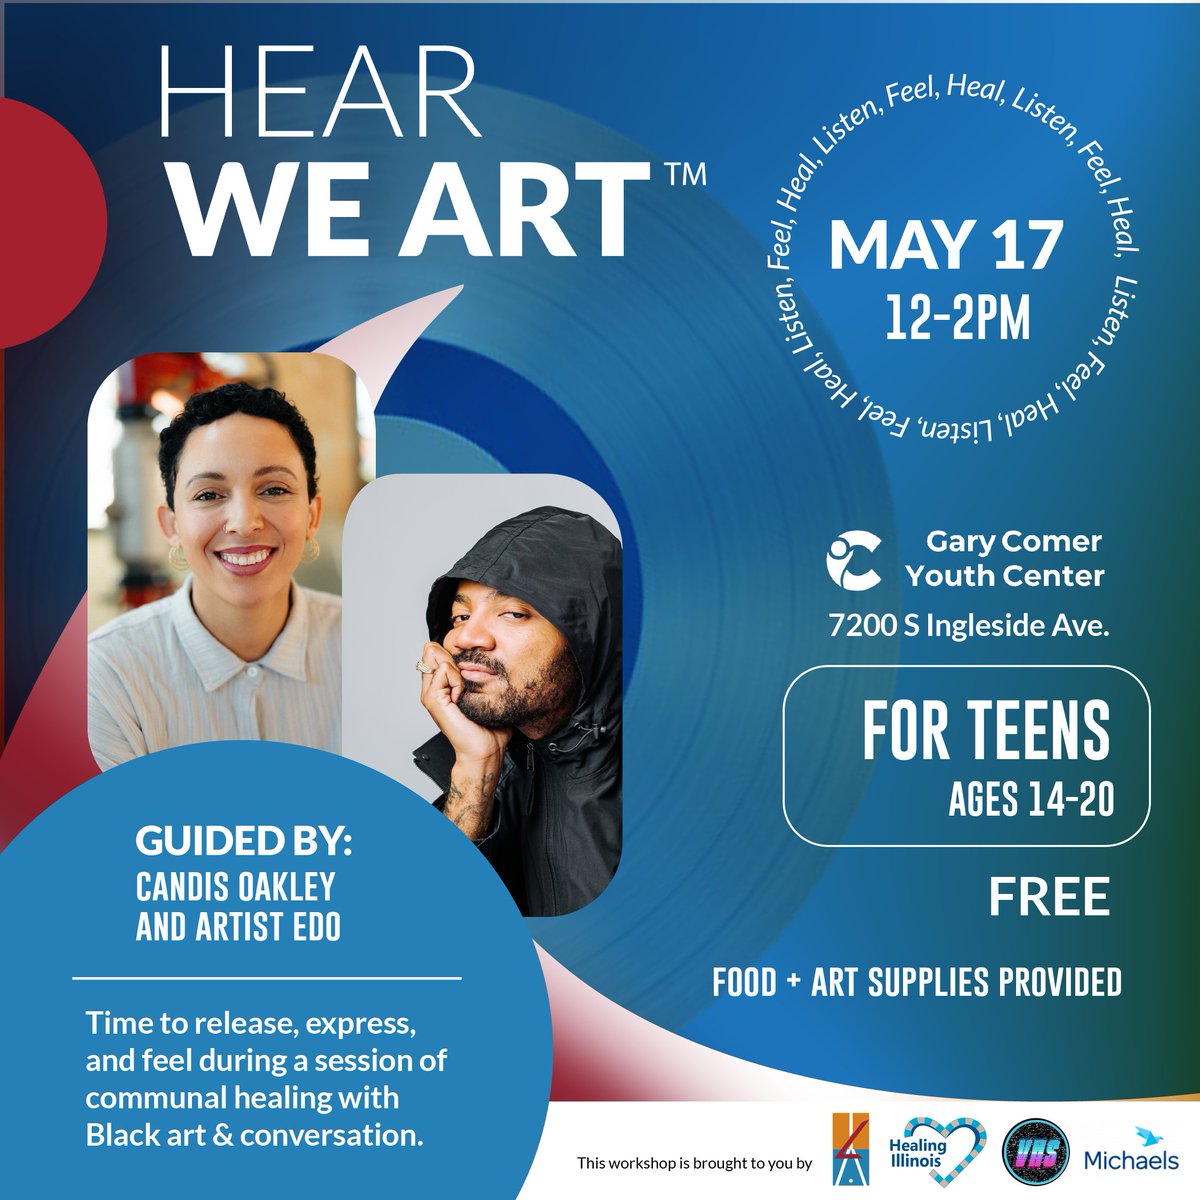 Know some Chicago teens eager to connect, express, and release through an evening of art and connection? Join the amazing Candis Oakley and Artist Edo next Friday 5/17 at the Gary Comer Youth Center for the next installment of Hear We Art from @ILAcreativestudio